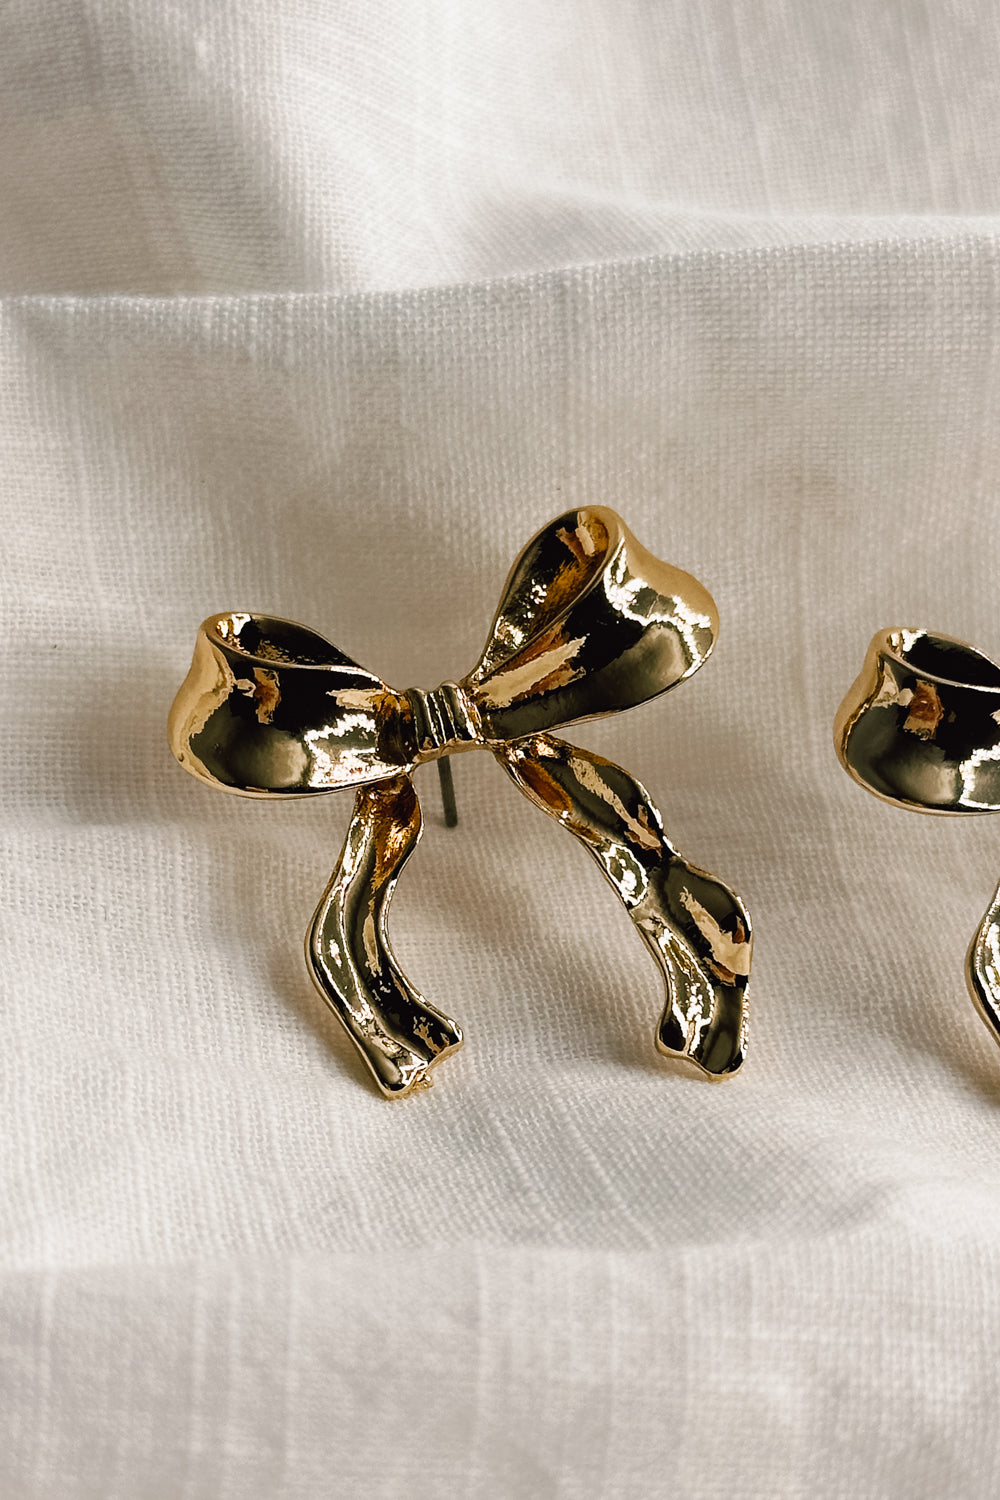 Close up view of the Lois Gold Bow Stud Earrings which features gold bow shaped earrings with stud back closures